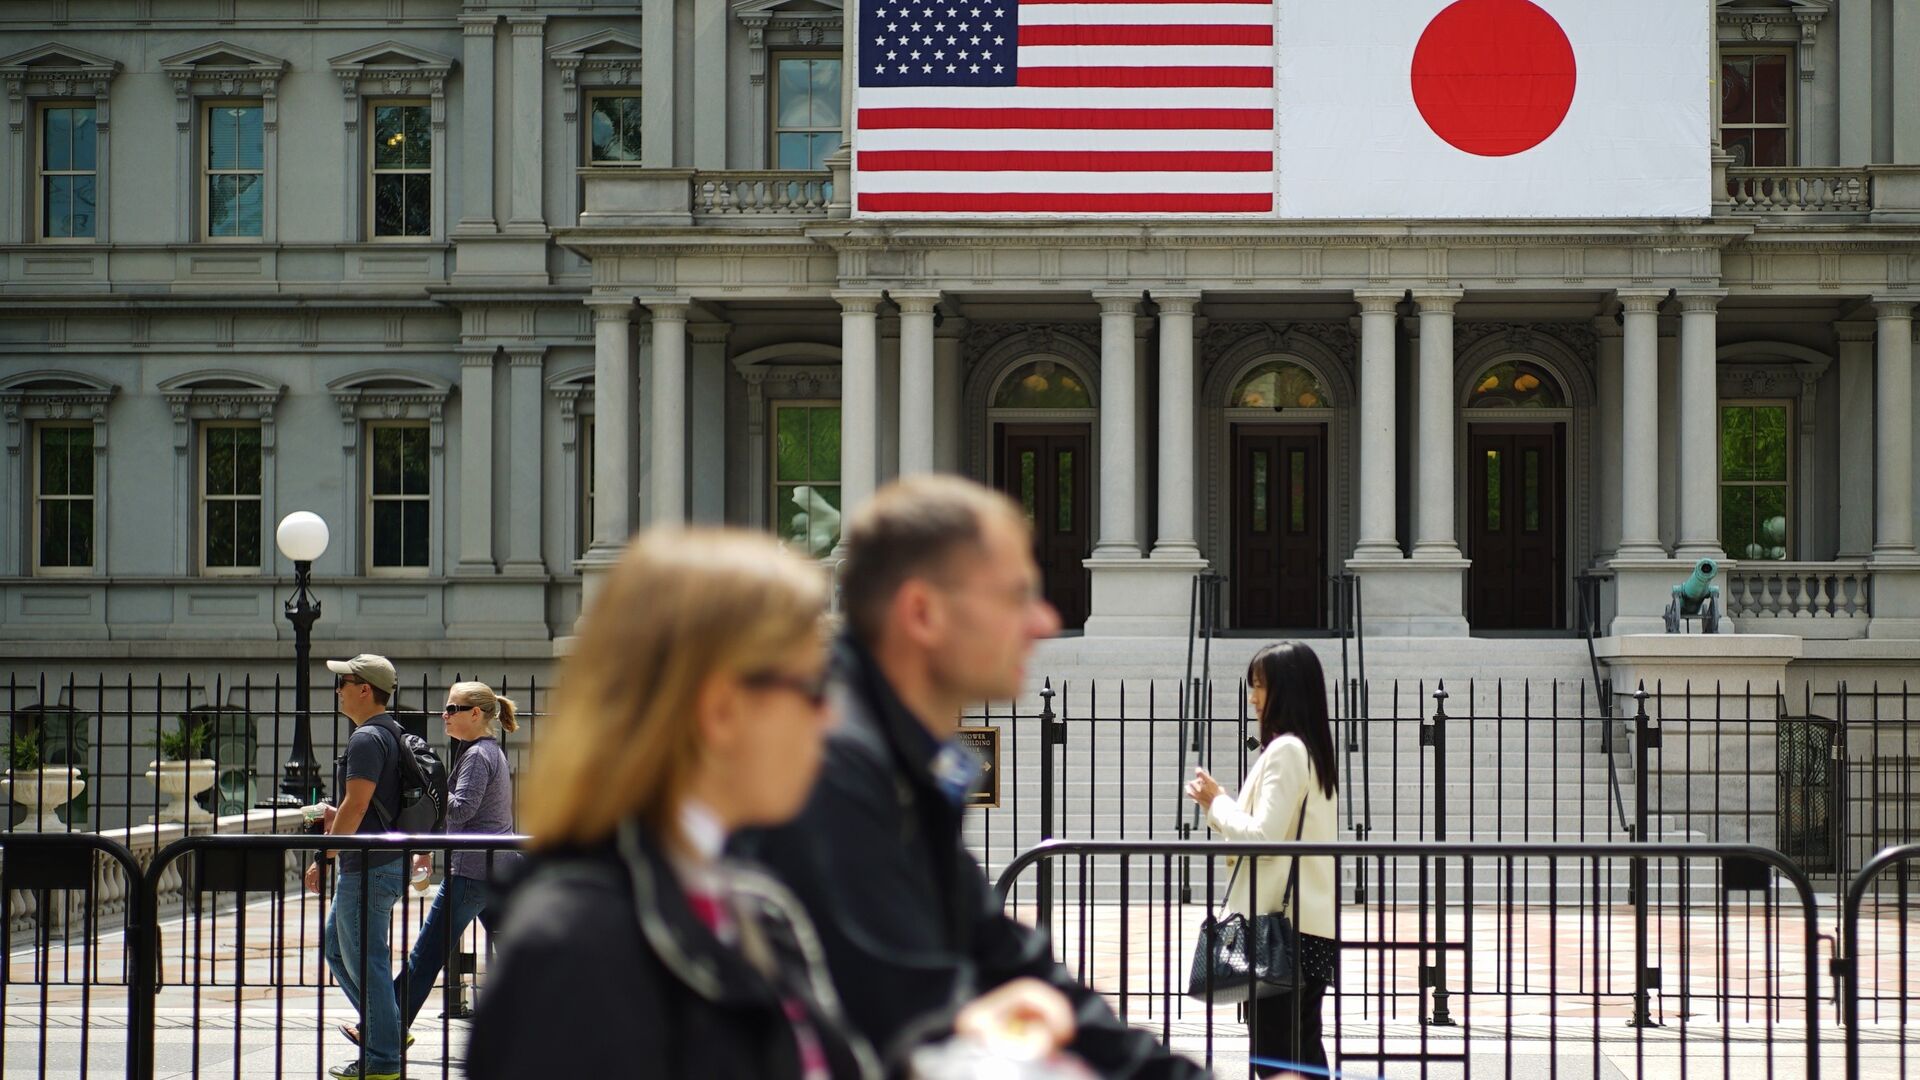 Pedestrians pass infront of US and Japan flags on the Eisenhower Executive Office Building next to the White House on April 27, 2015 in Washington, DC - Sputnik International, 1920, 07.02.2022